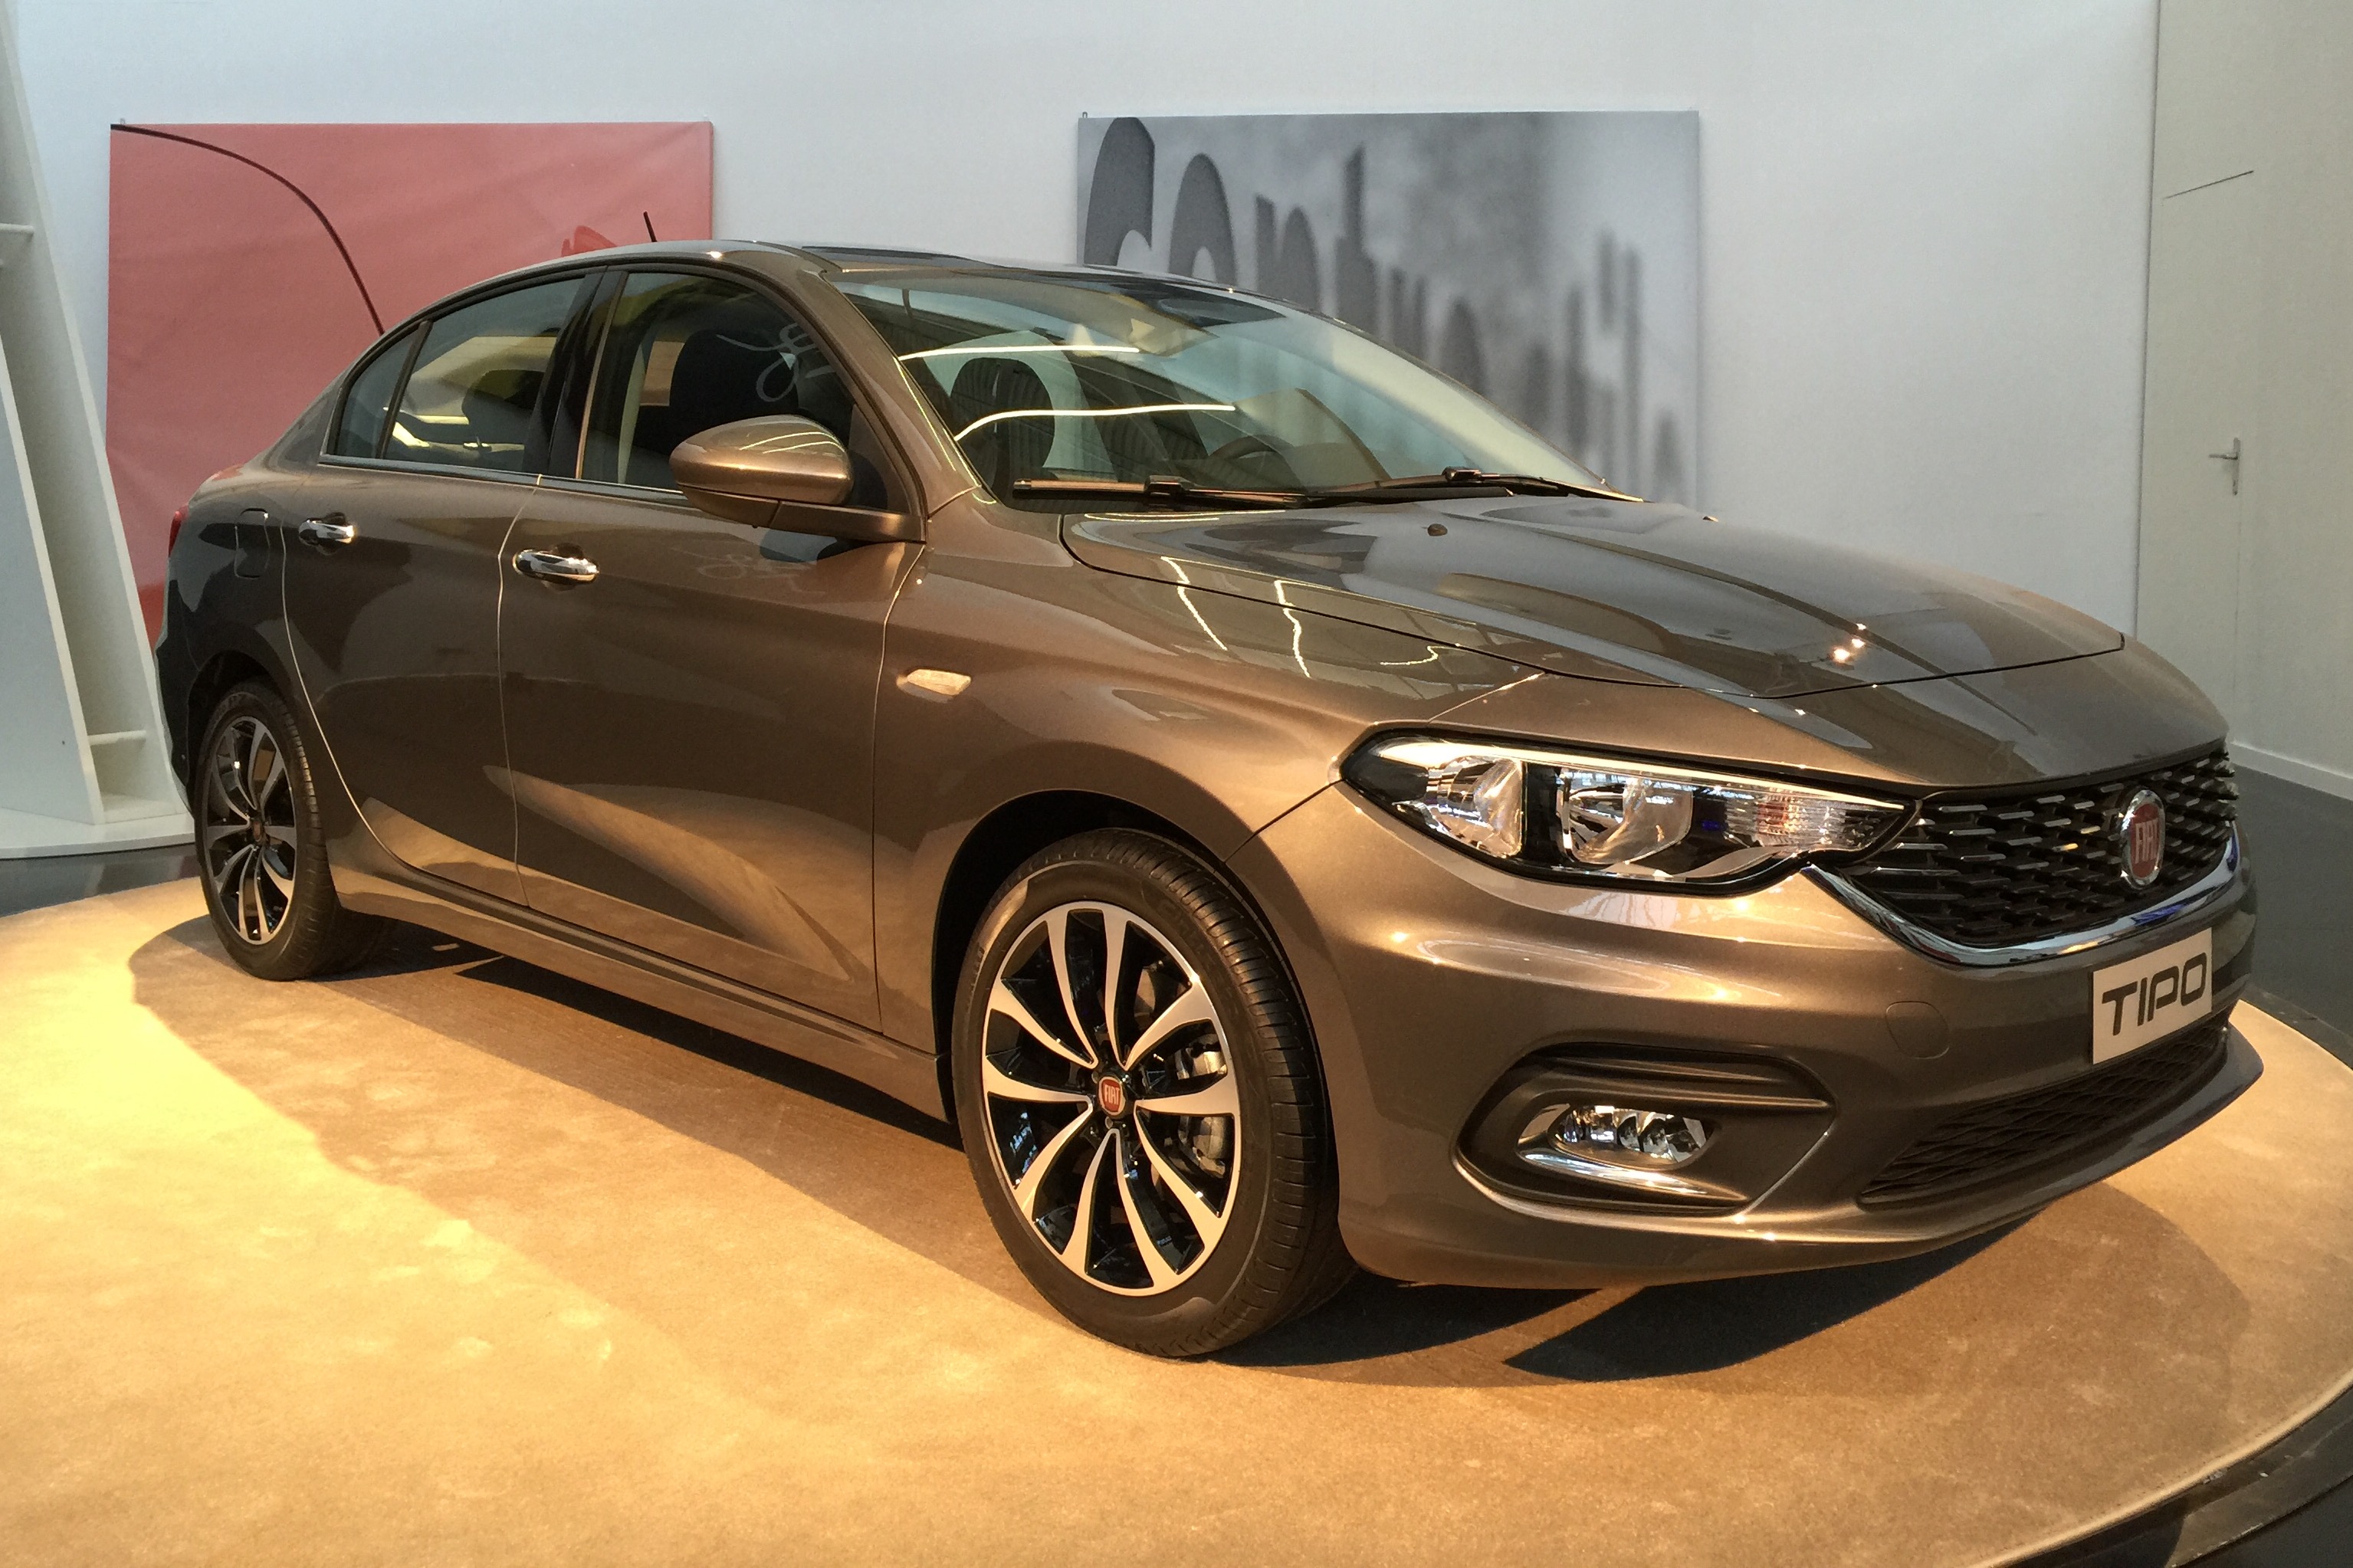 Fiat Tipo modern restyling